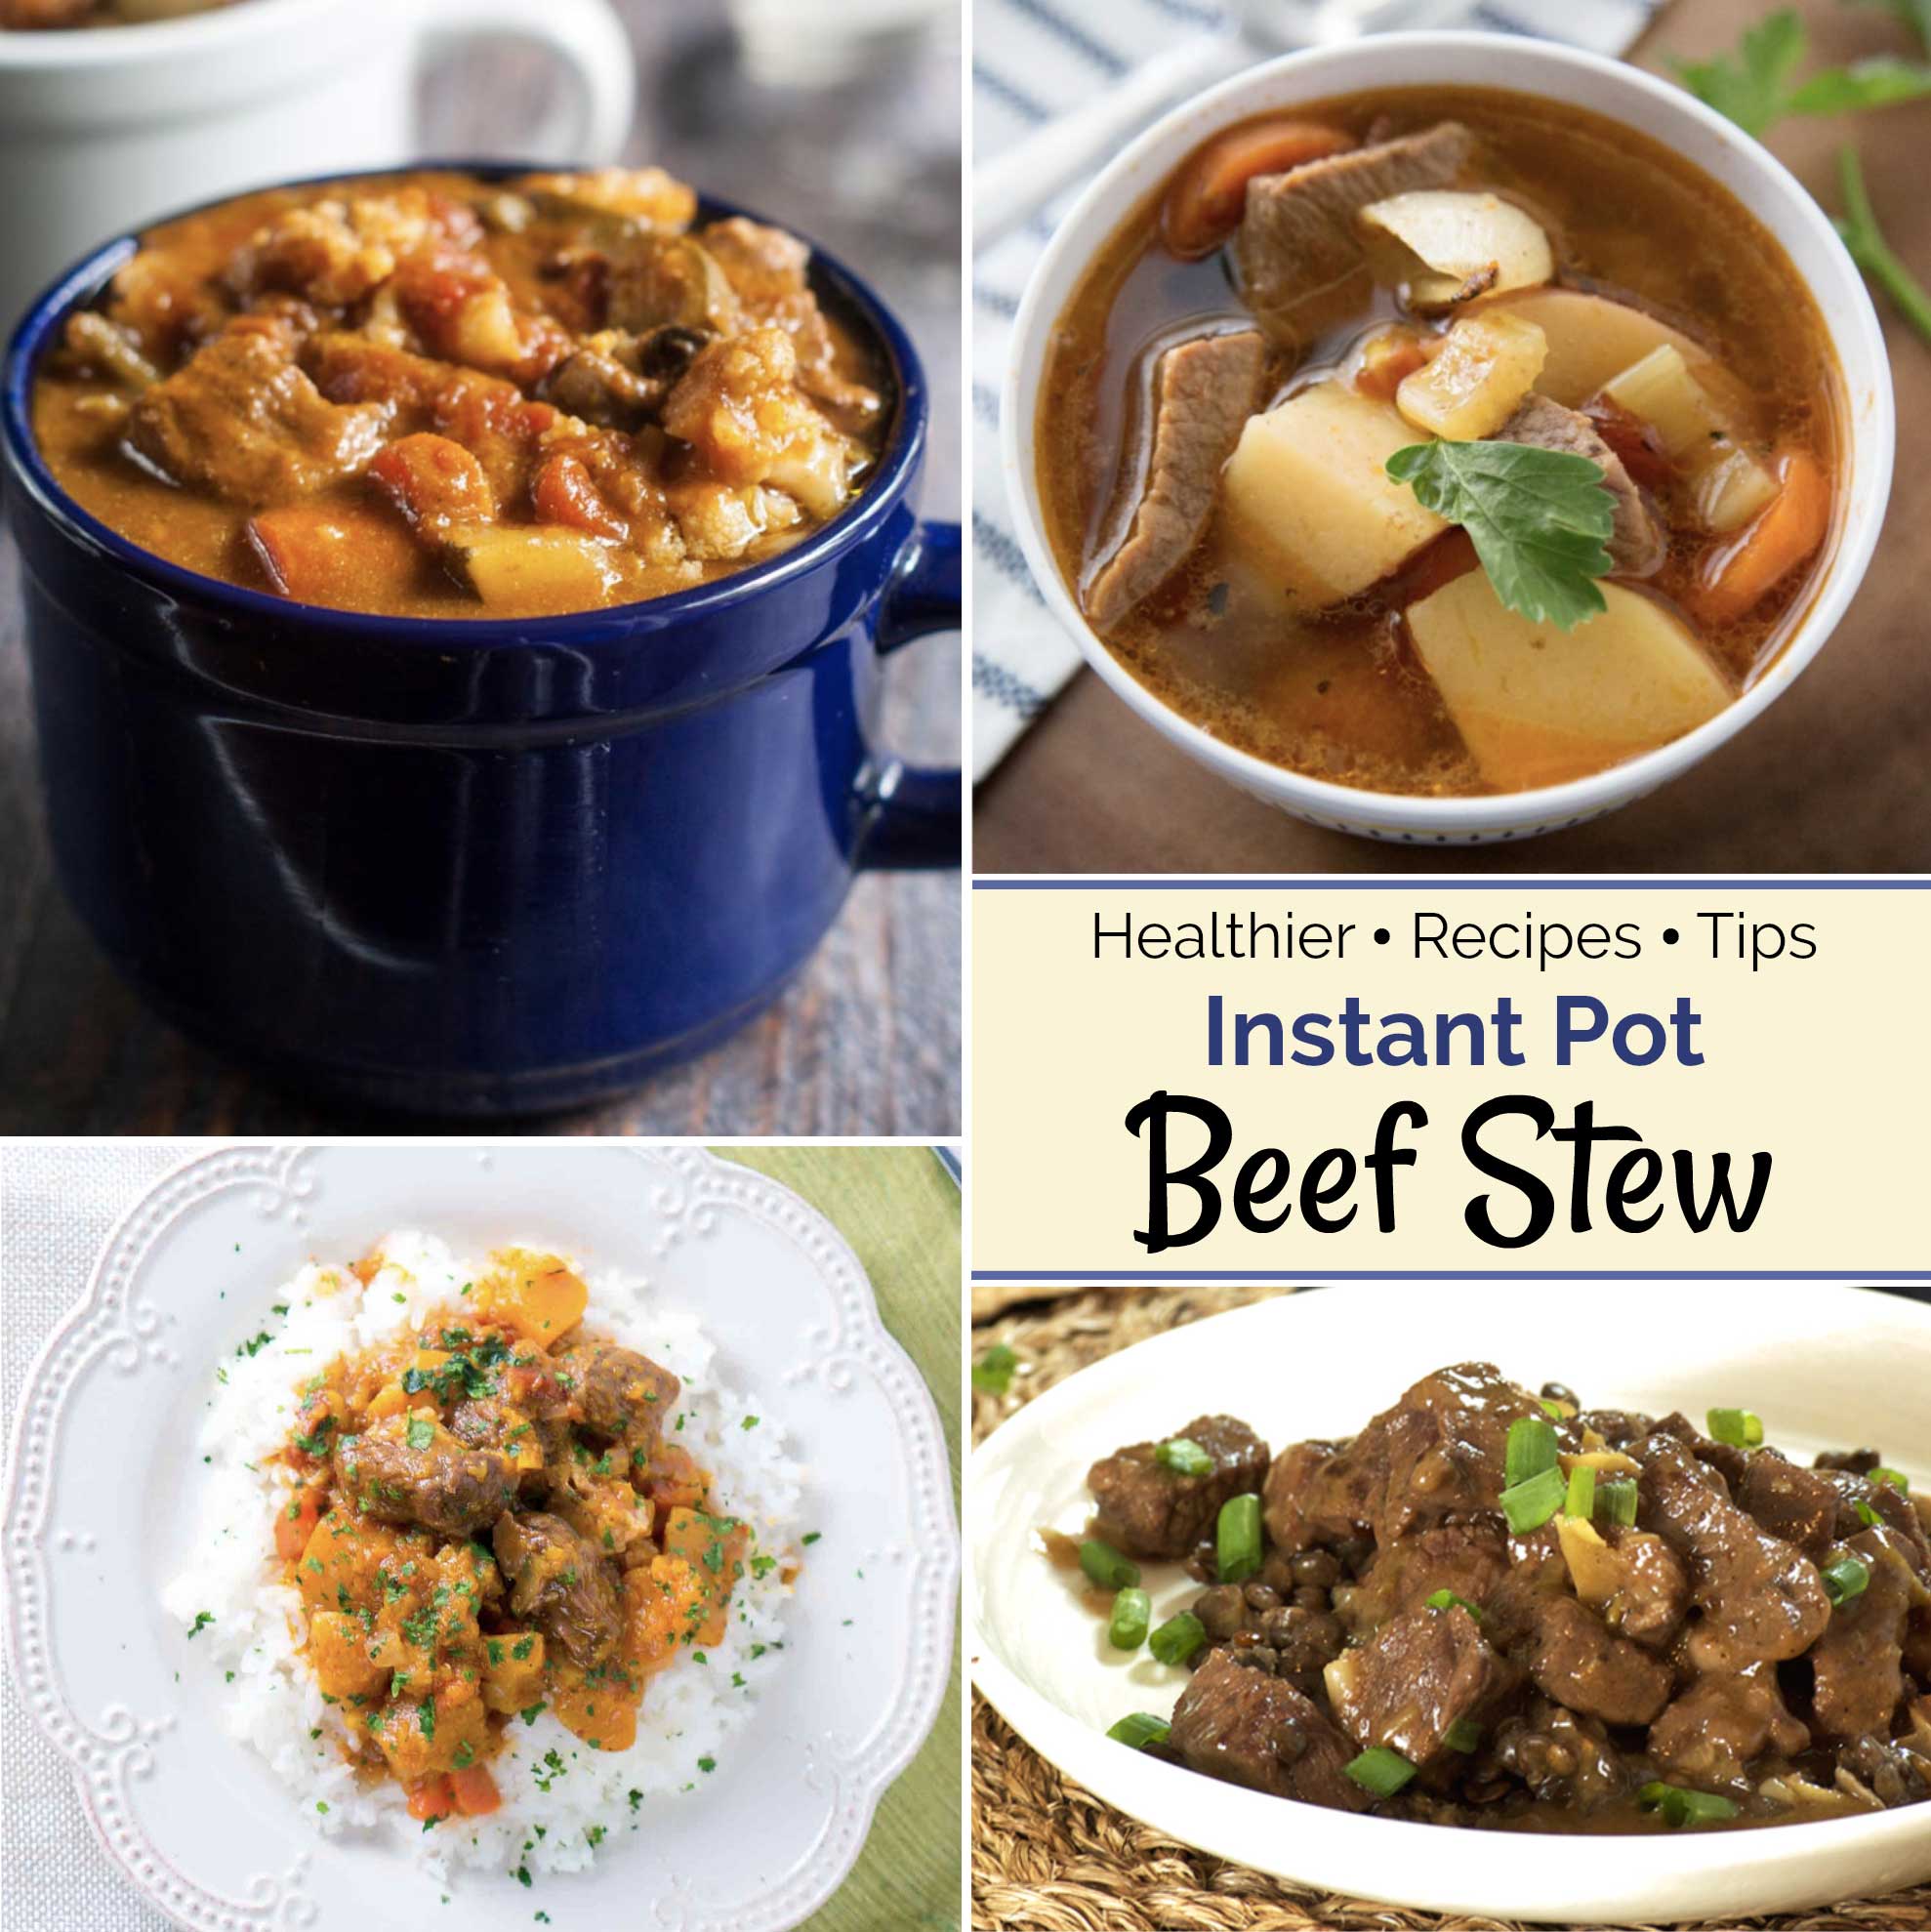 We’ve got a whole list of healthy pressure cooker stew recipes – from leaner beef stews, to chicken, seafood, and even meat-free! Plus, we’ve got tips for how to make your stew healthier and more nutritious!